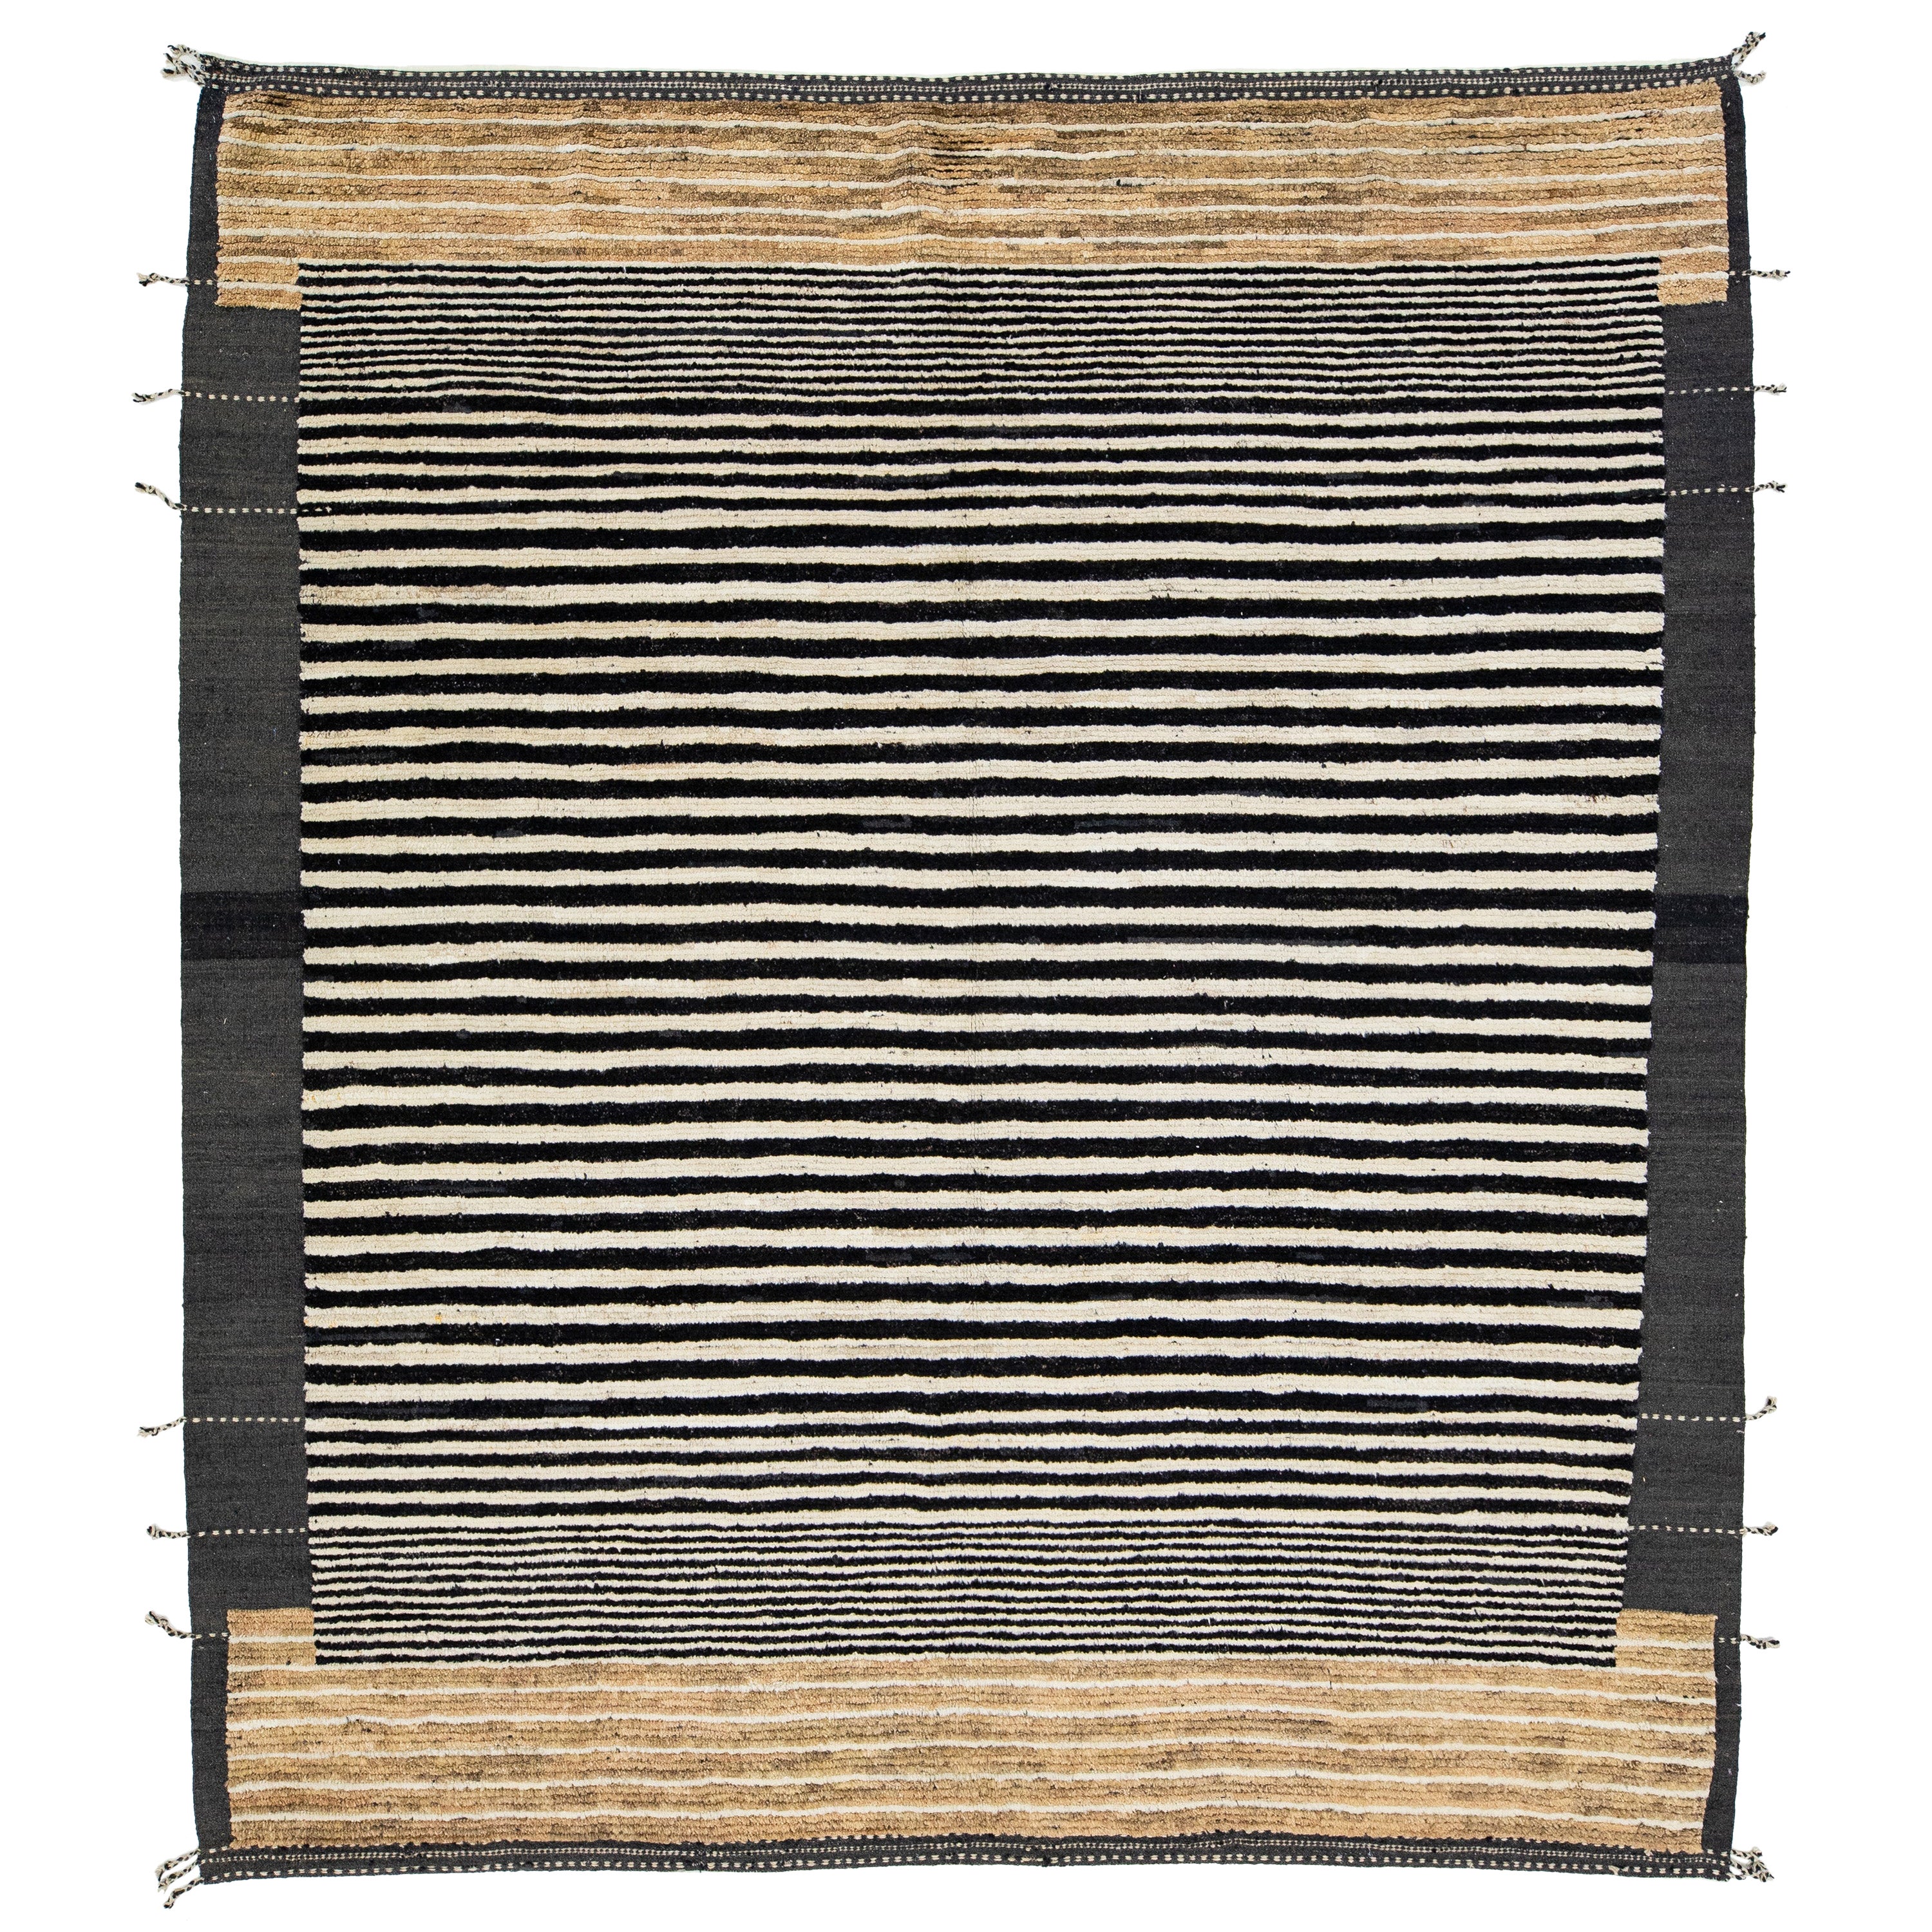 Contemporary Moroccan Wool Rug featuring Retro-inspired Design and Earthy Tones For Sale